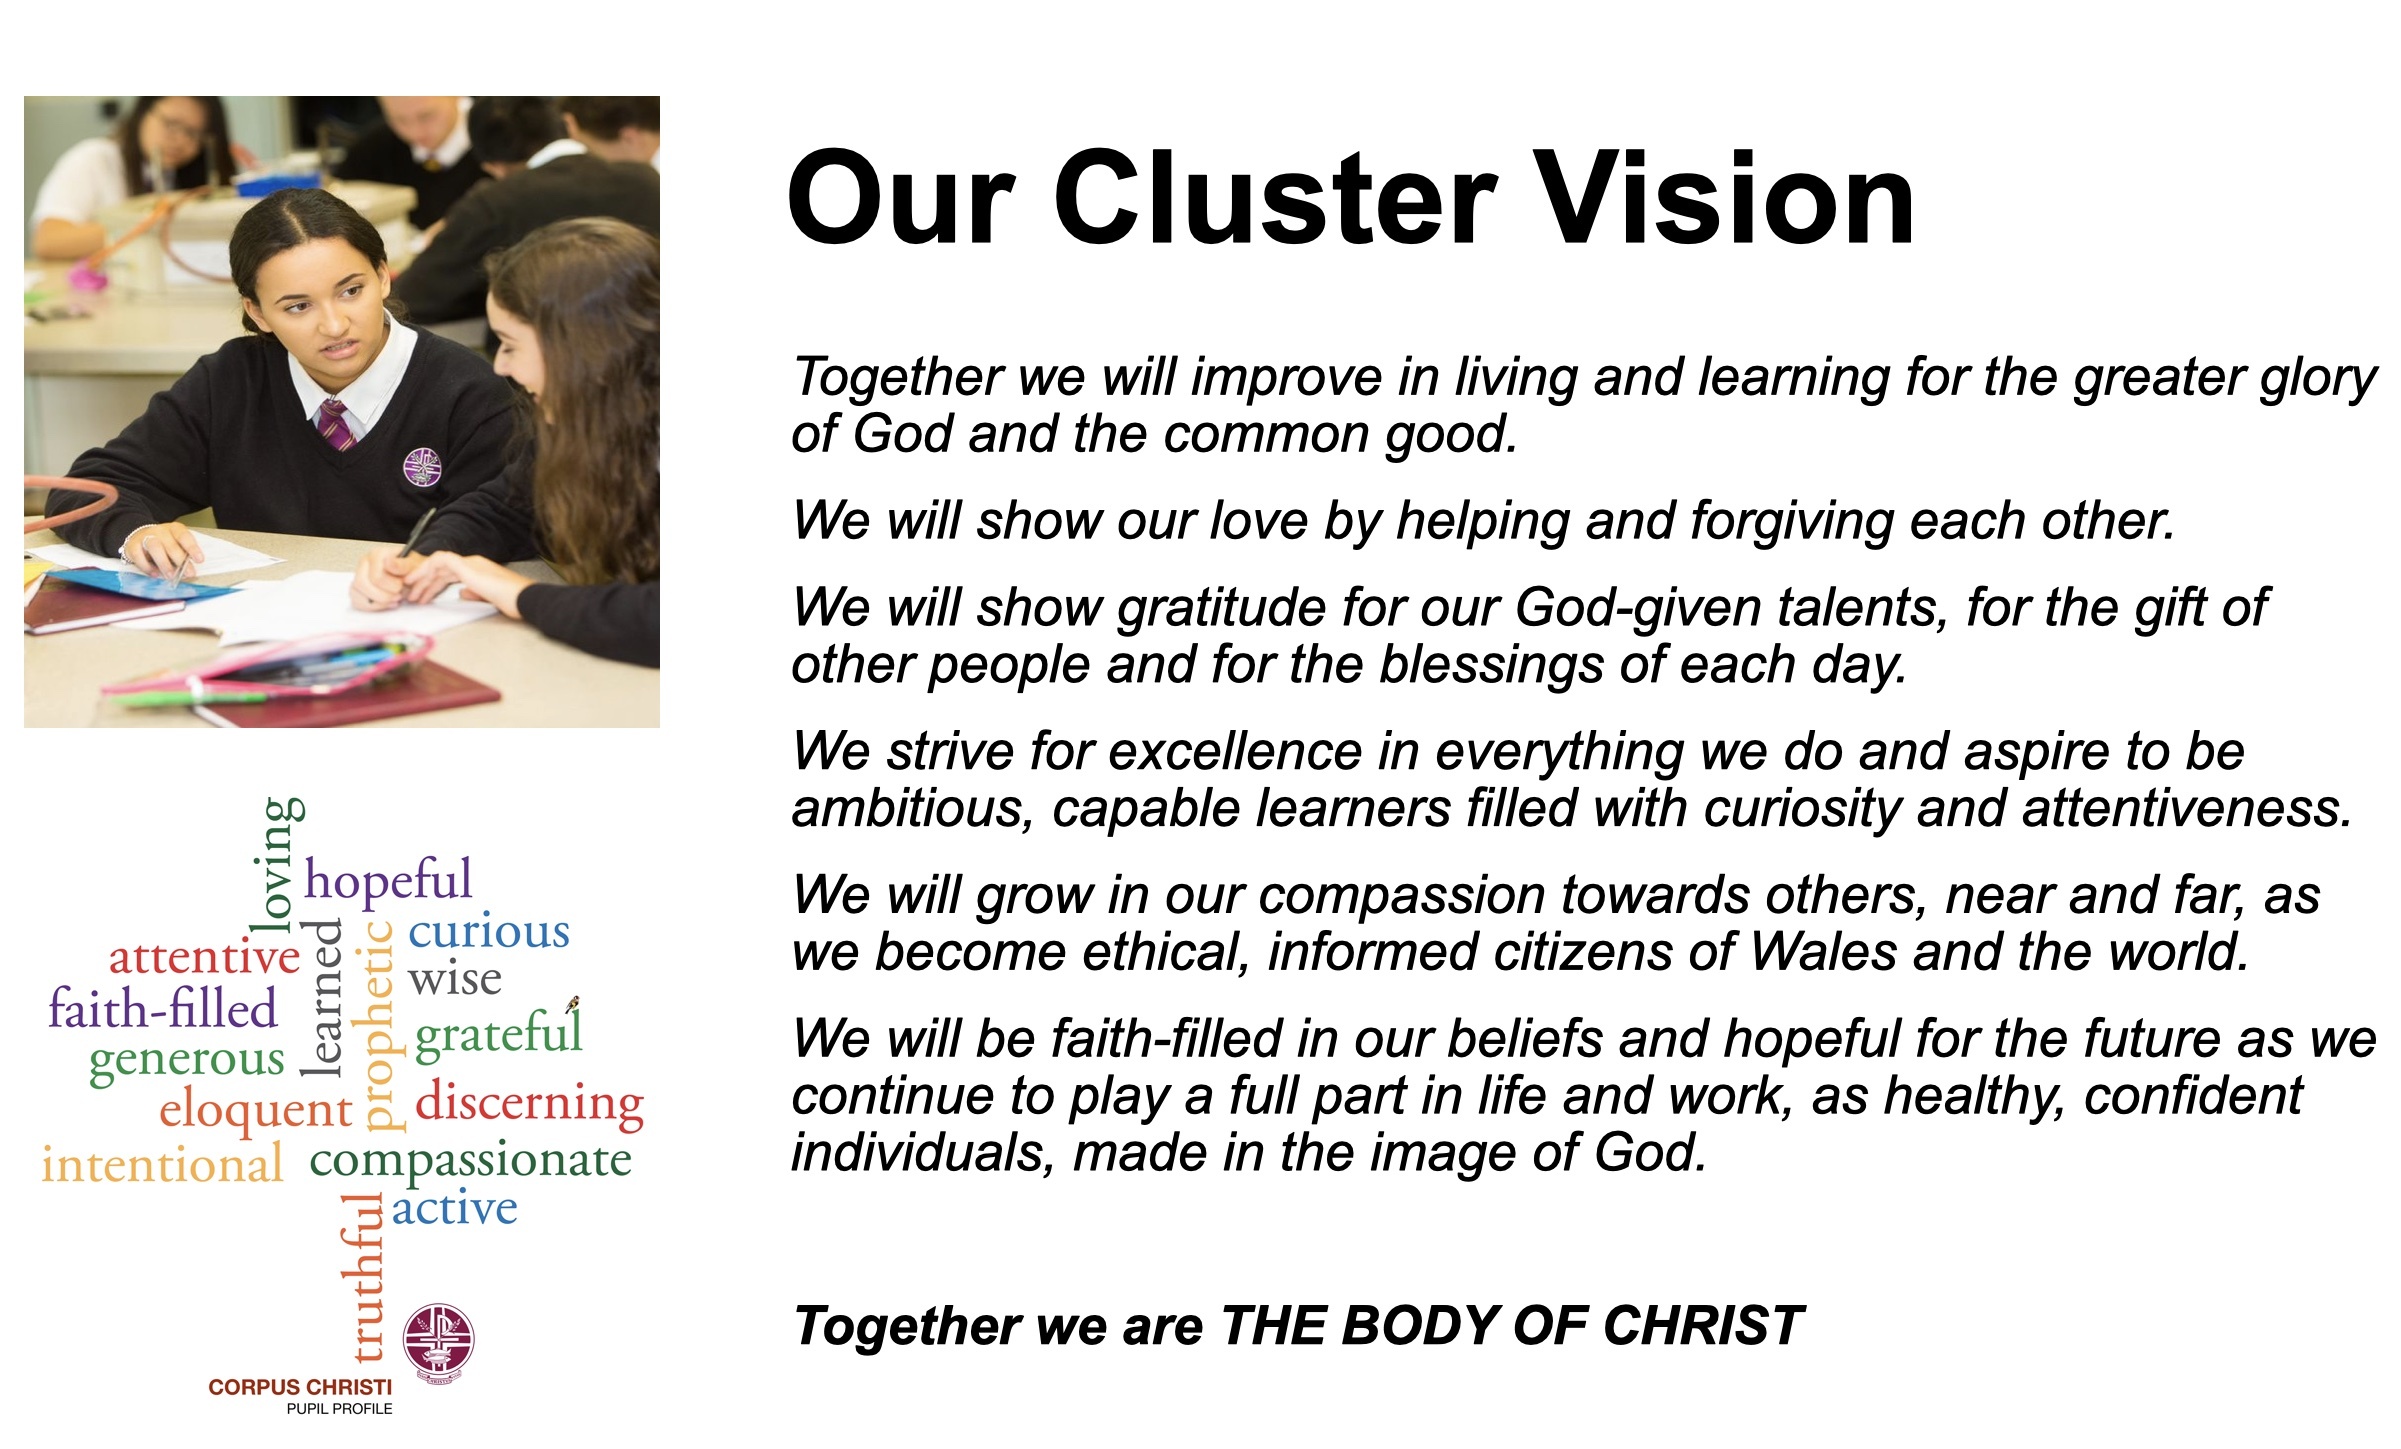 Our Cluster Vision